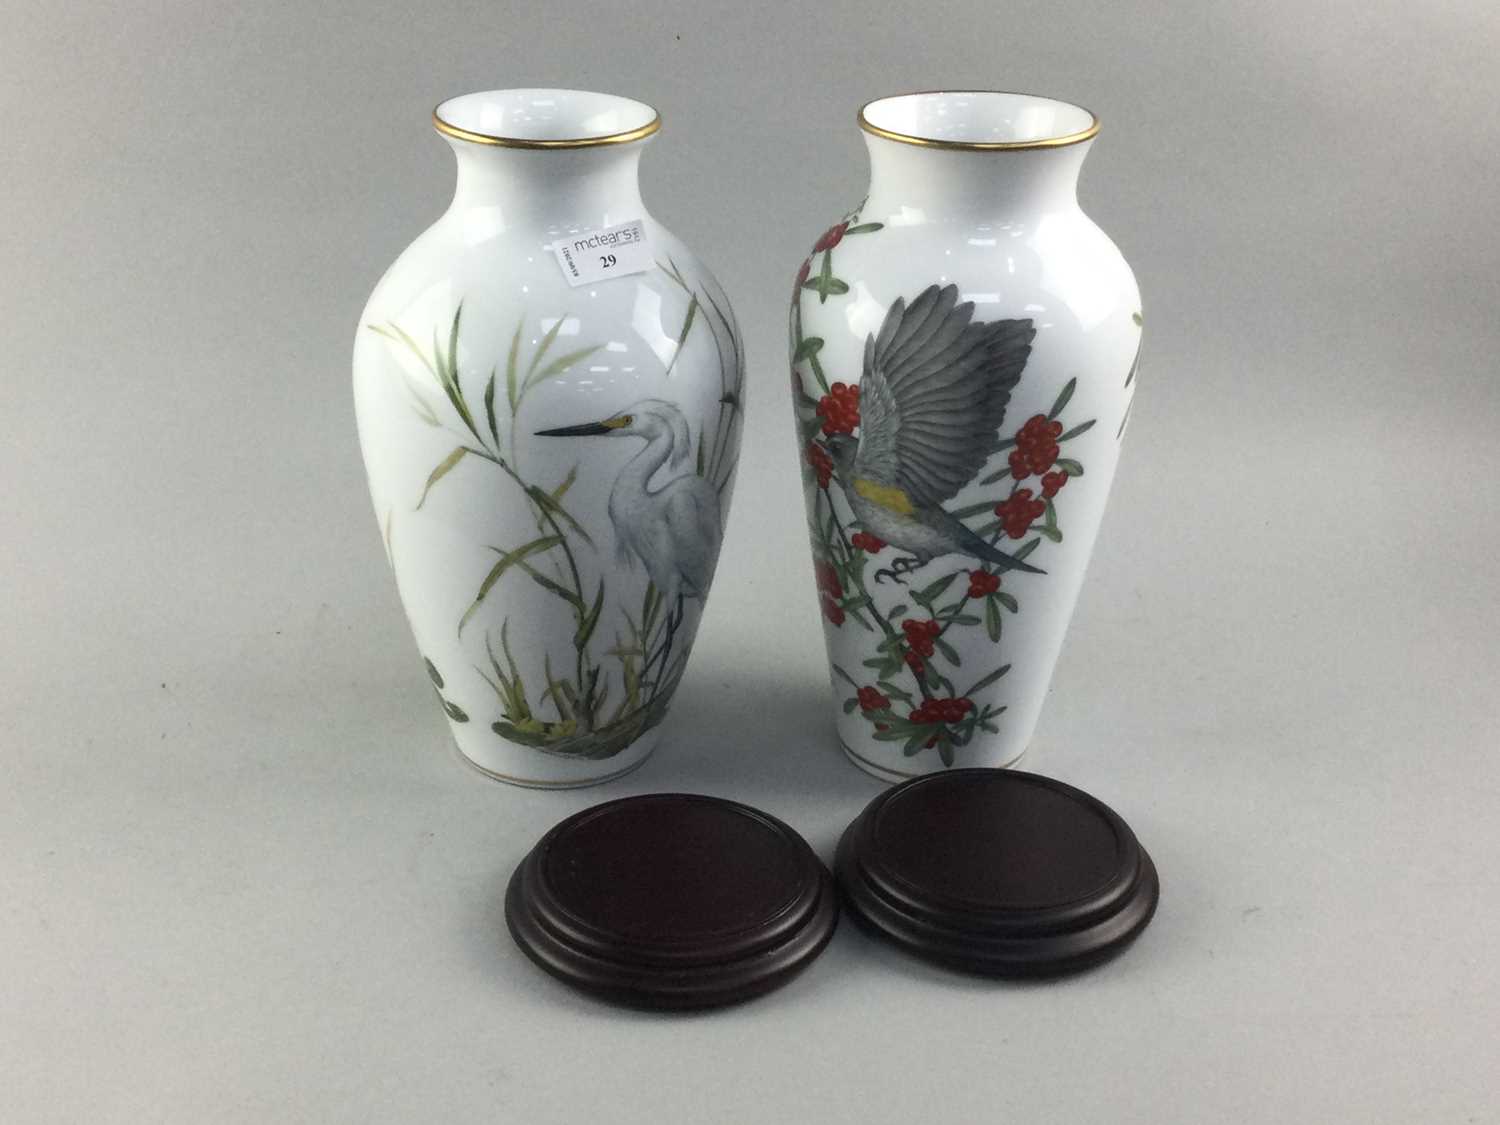 Lot 29 - A PAIR OF FRANKLIN MINT 'JAPAN' PORCELAIN VASES ALONG WITH TWO EGYPTIAN FIGURES